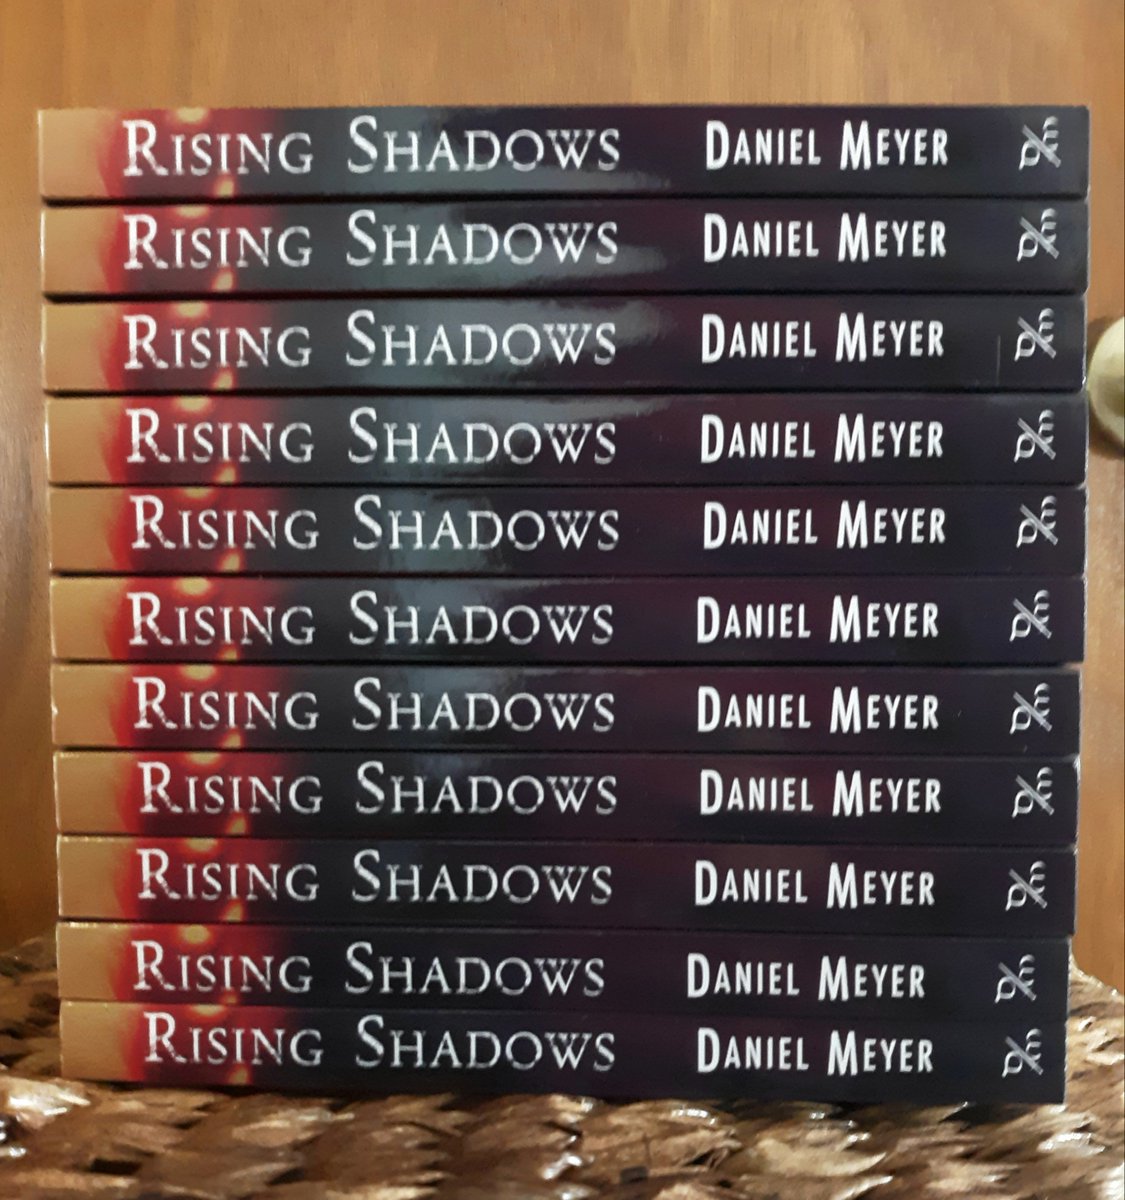 About to be on their way to some good homes #amwritingfantasy #writingcommunity #books #booktwitter #readersoftwitter #indieapril #urbanfantasy #booktwt #readingcommunity #writerslife #writers #authors #authorsoftwitter #amwritingfantasy